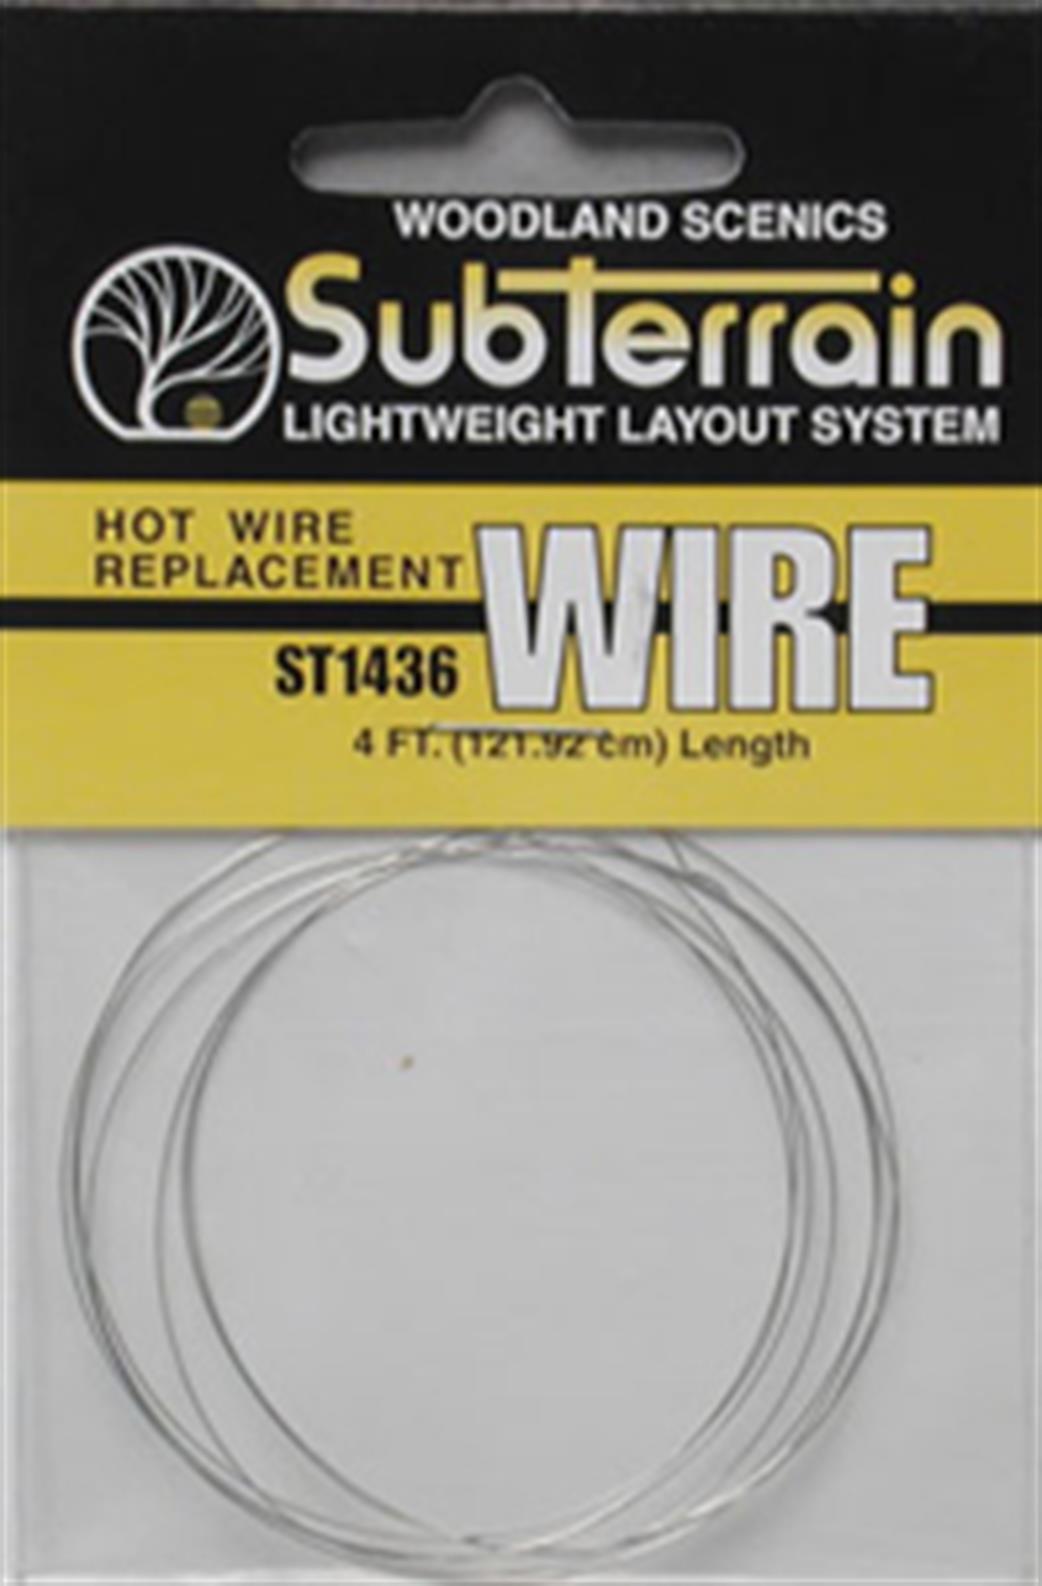 Woodland Scenics  ST1436 Replacement Wire for Hot Wire Foam Cutter